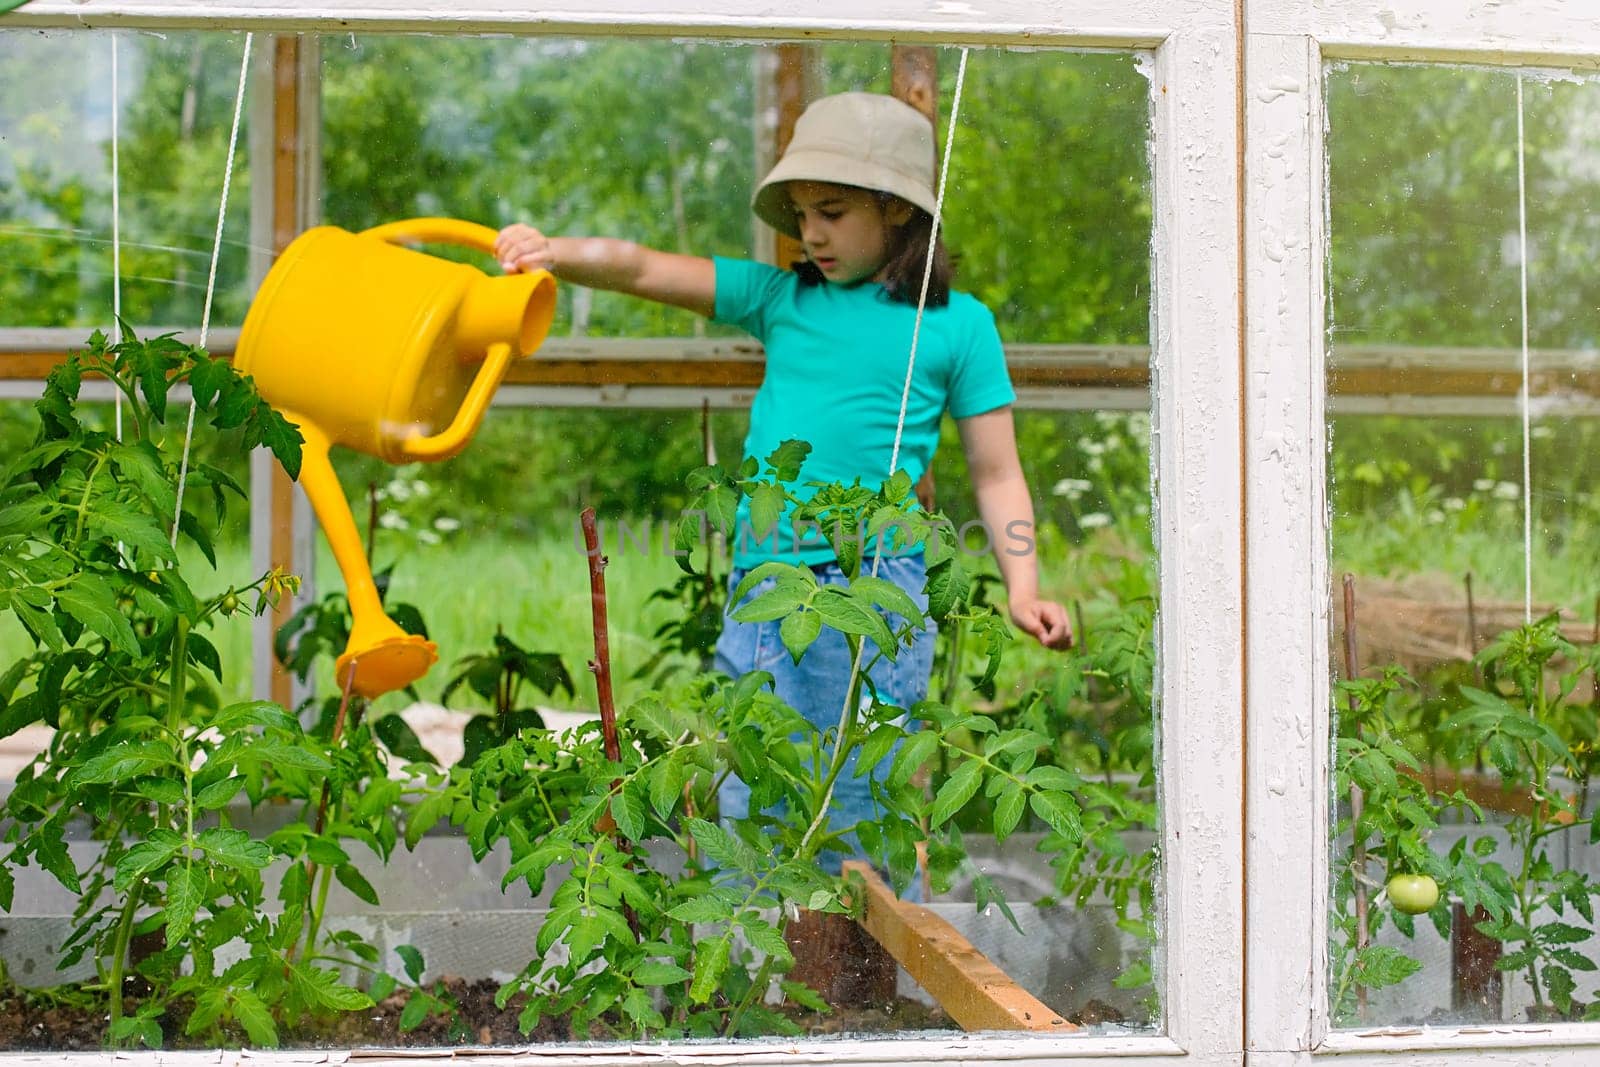 A little girl in a green T-shirt waters with a yellow watering can, tomato bushes in a glass greenhouse, in summer, on a sunny day.